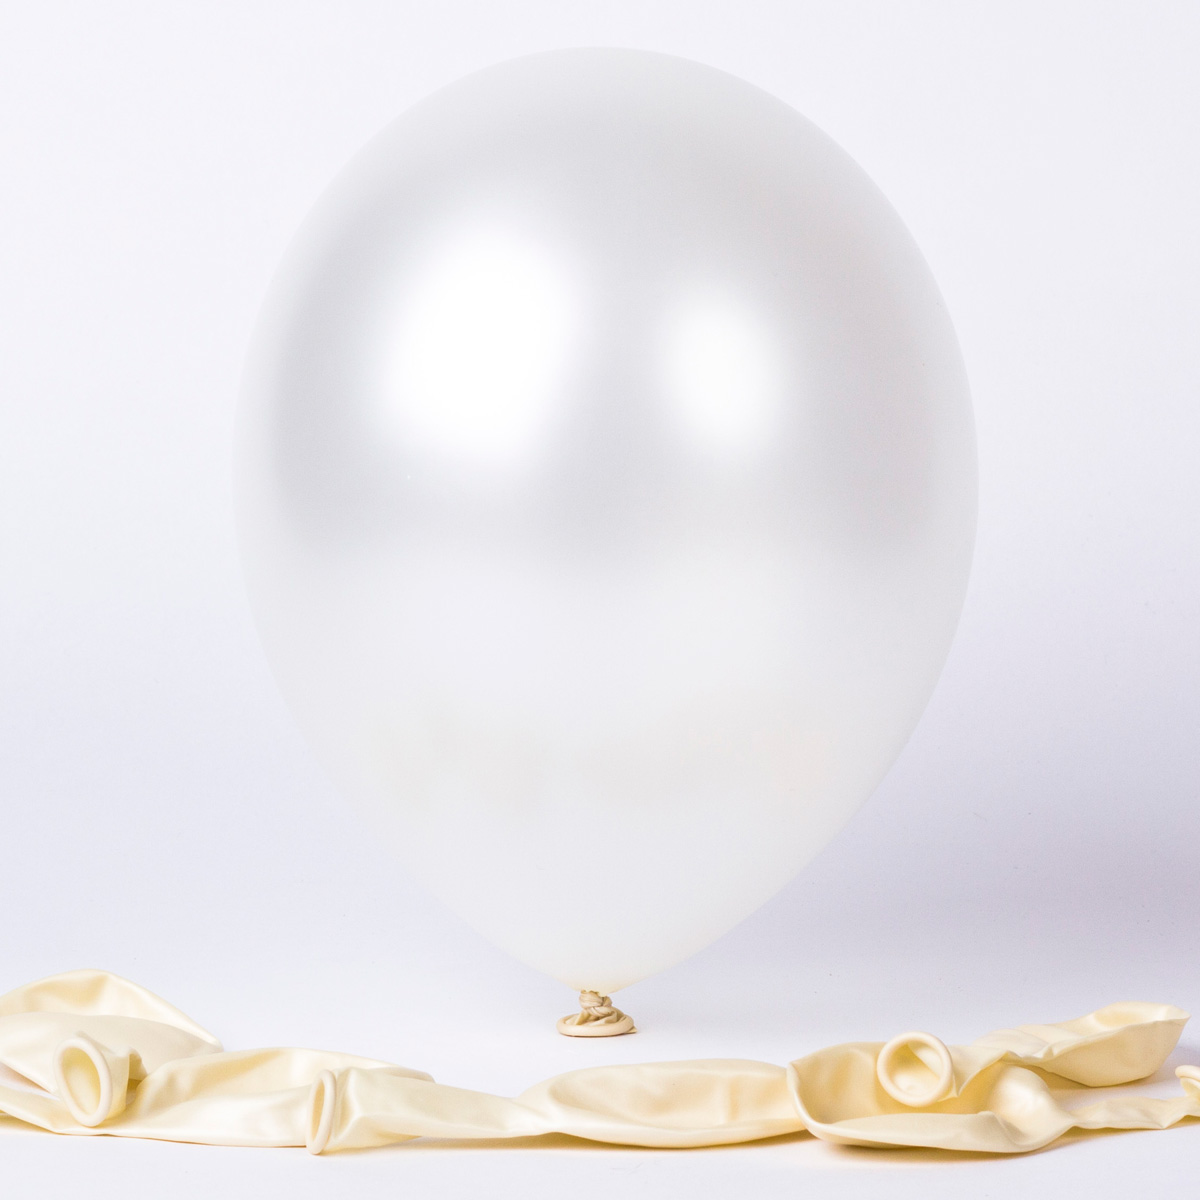 Metallic White Air-fill Latex Balloons - Pack Of 6